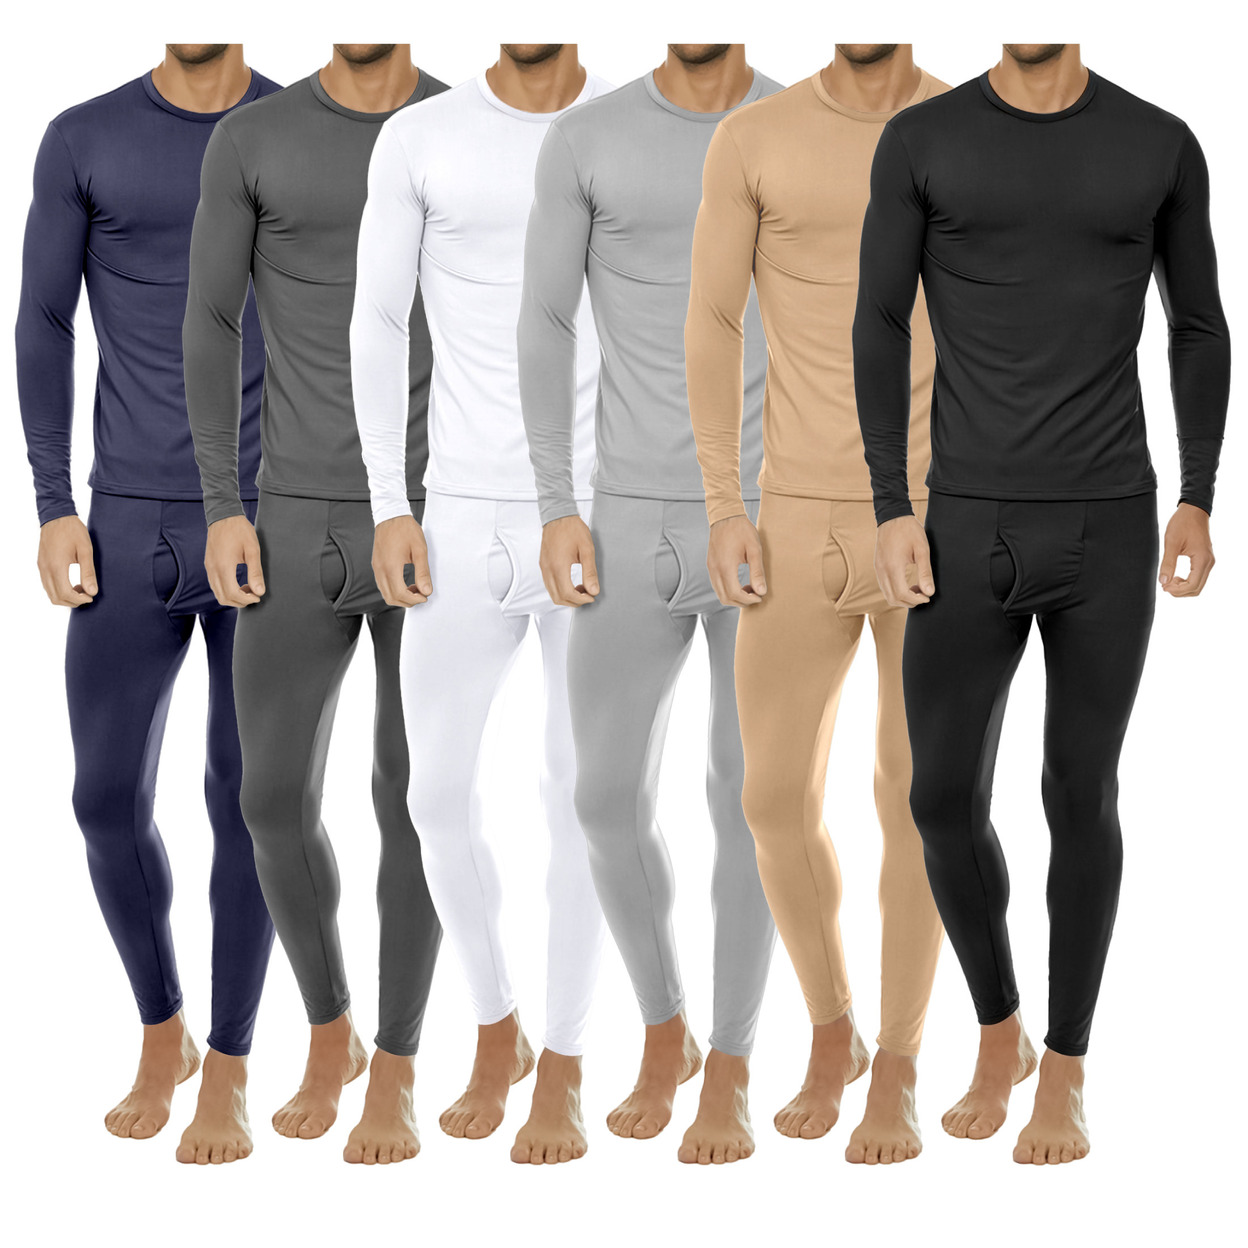 2-Pieces: Men's Winter Warm Fleece Lined Thermal Underwear Set For Cold Weather - Tan, Large